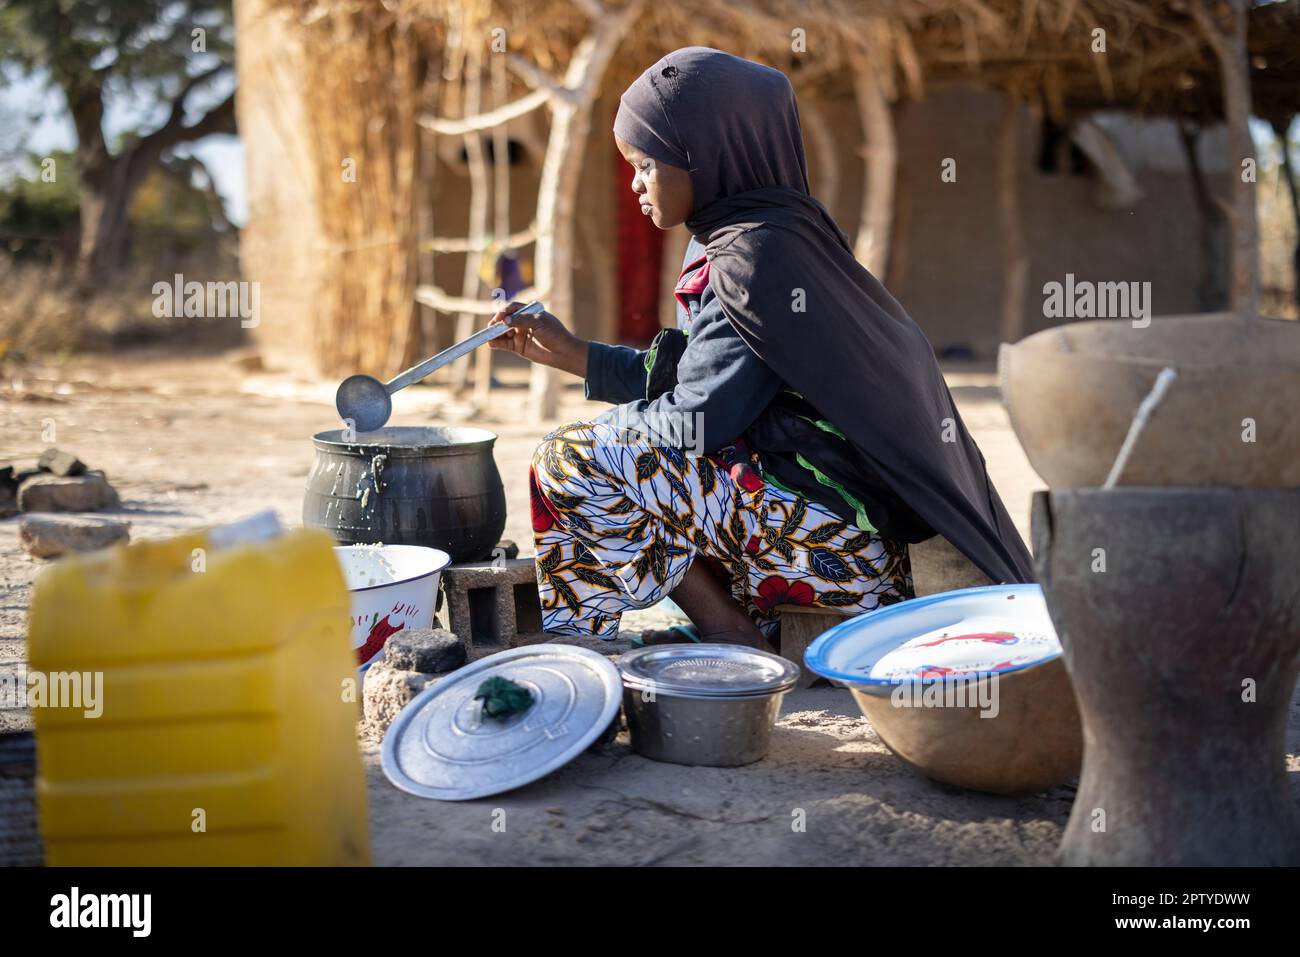 A young Fulani refugee woman, displaced from conflict in the North, boils food over an open fire in Segou Region, Mali, West Africa. 2022 Mali drought and hunger crisis. Stock Photo